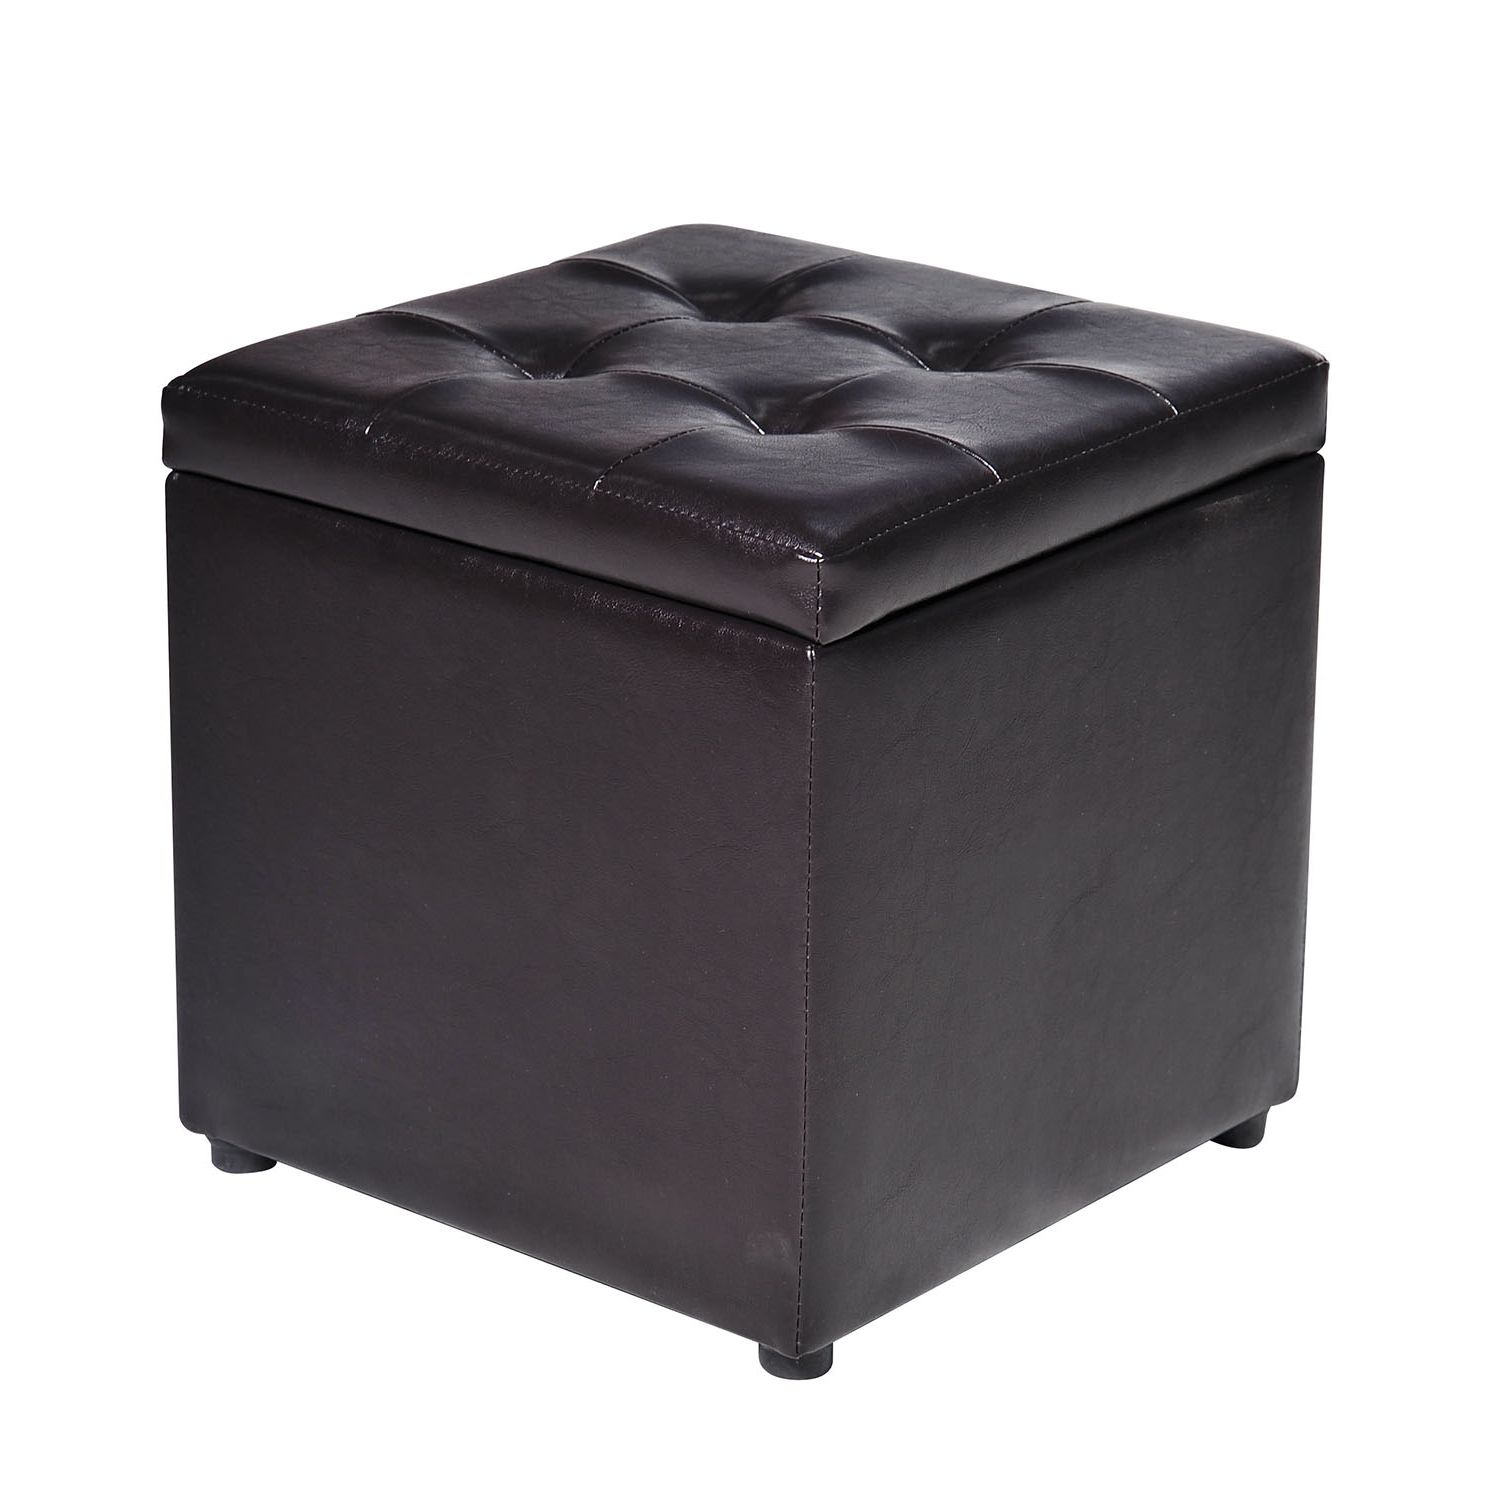 Homcom Faux Leather Foot Stool Storage Ottoman – Black Throughout Most Popular Black Faux Leather Column Tufted Ottomans (View 5 of 10)